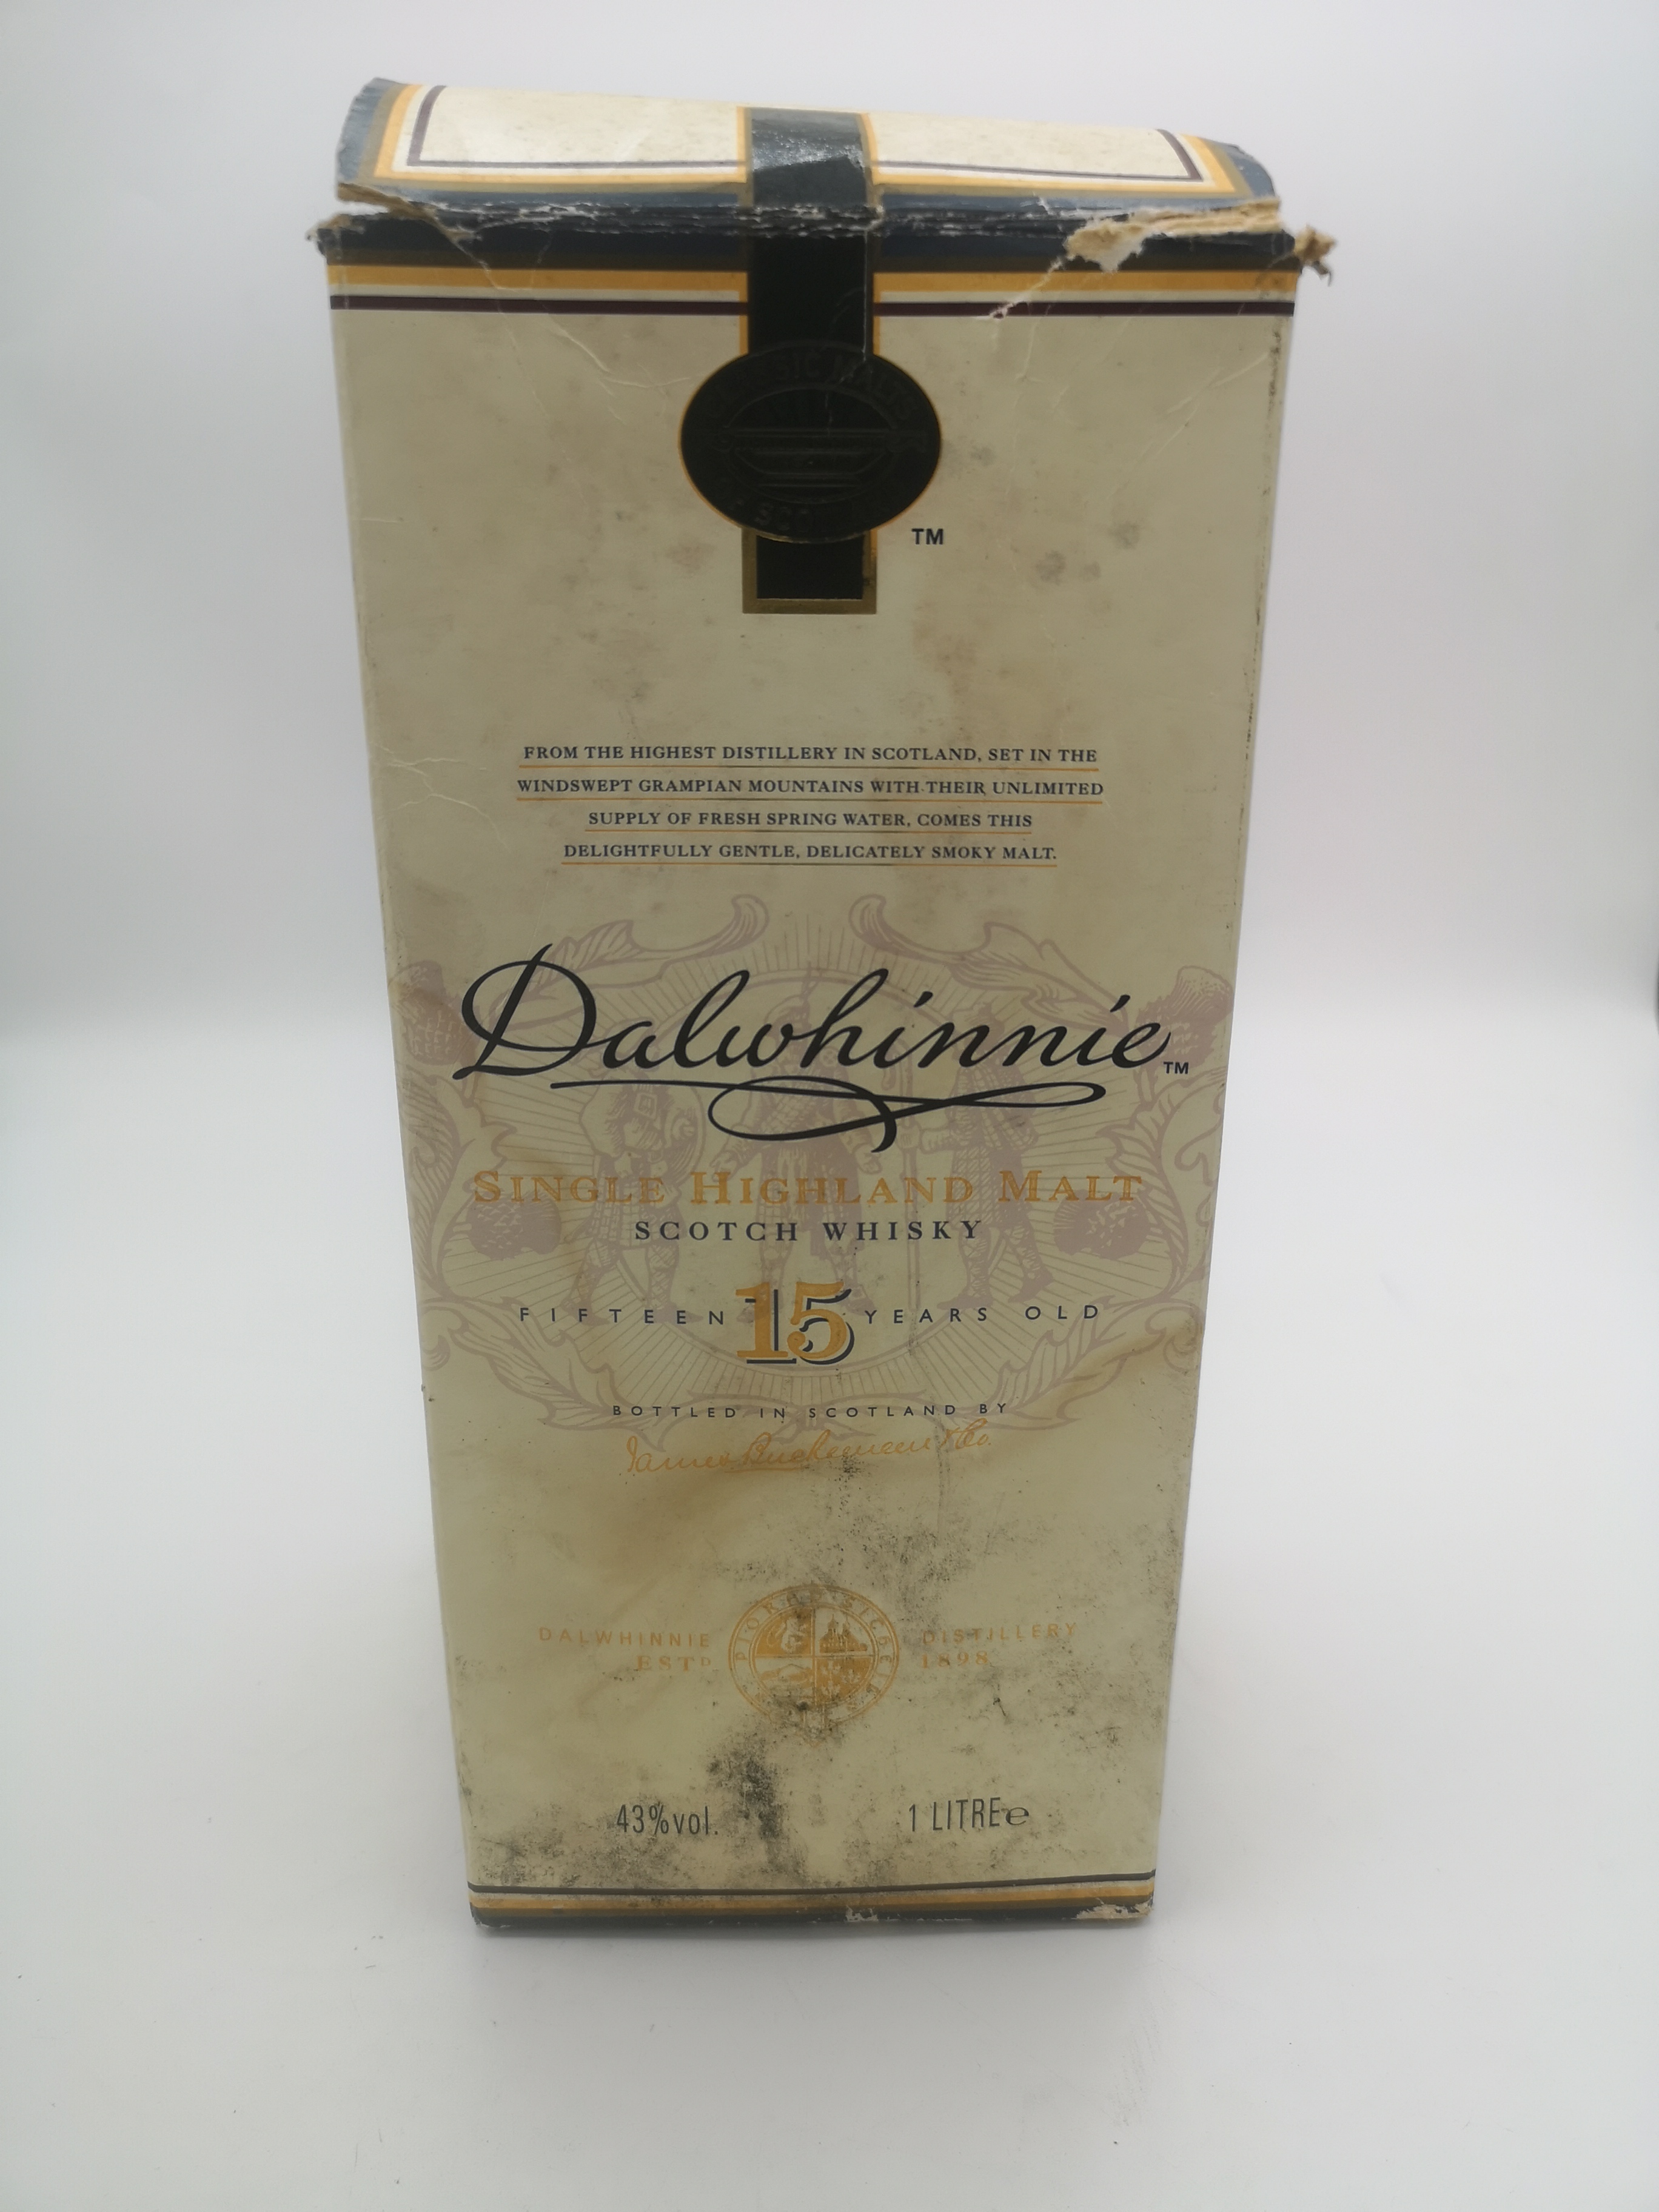 1l bottle of Dalwhinnie Scotch whisky - Image 5 of 8